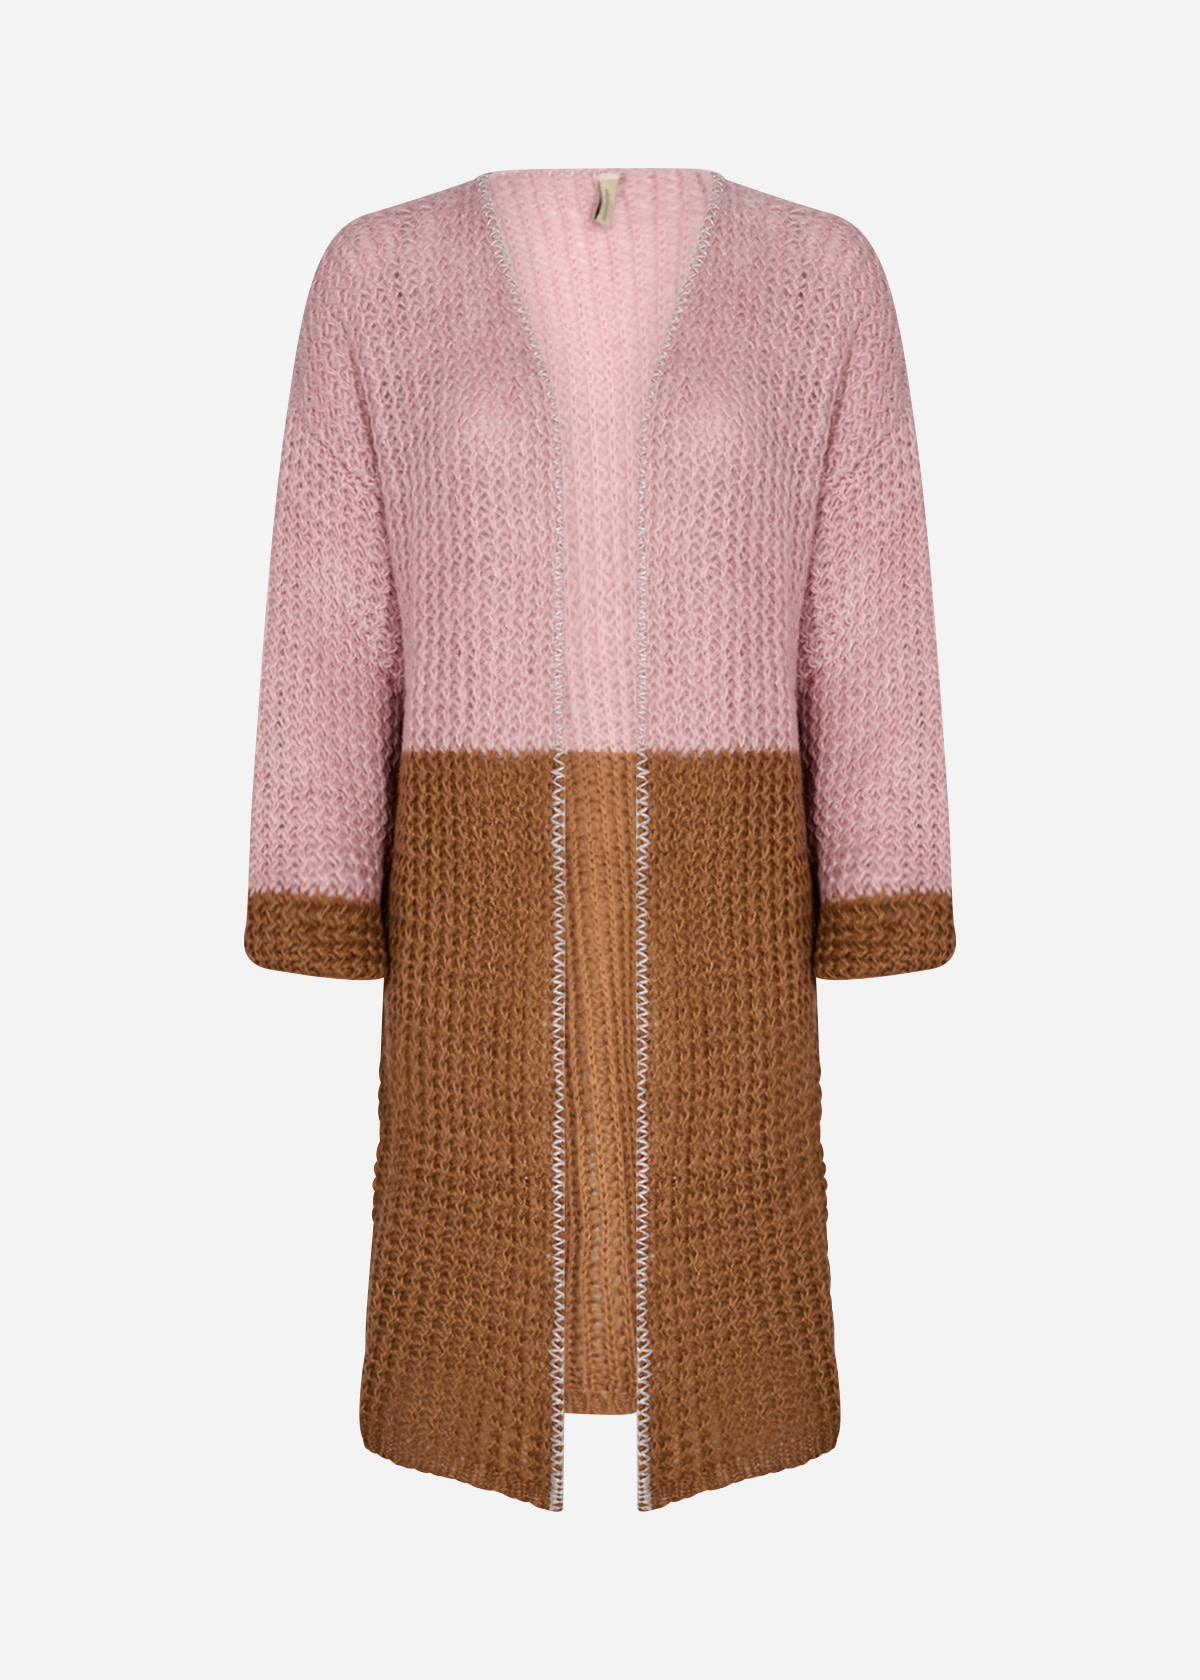 Evely Knitted Cardigan - Pale Blush Combi